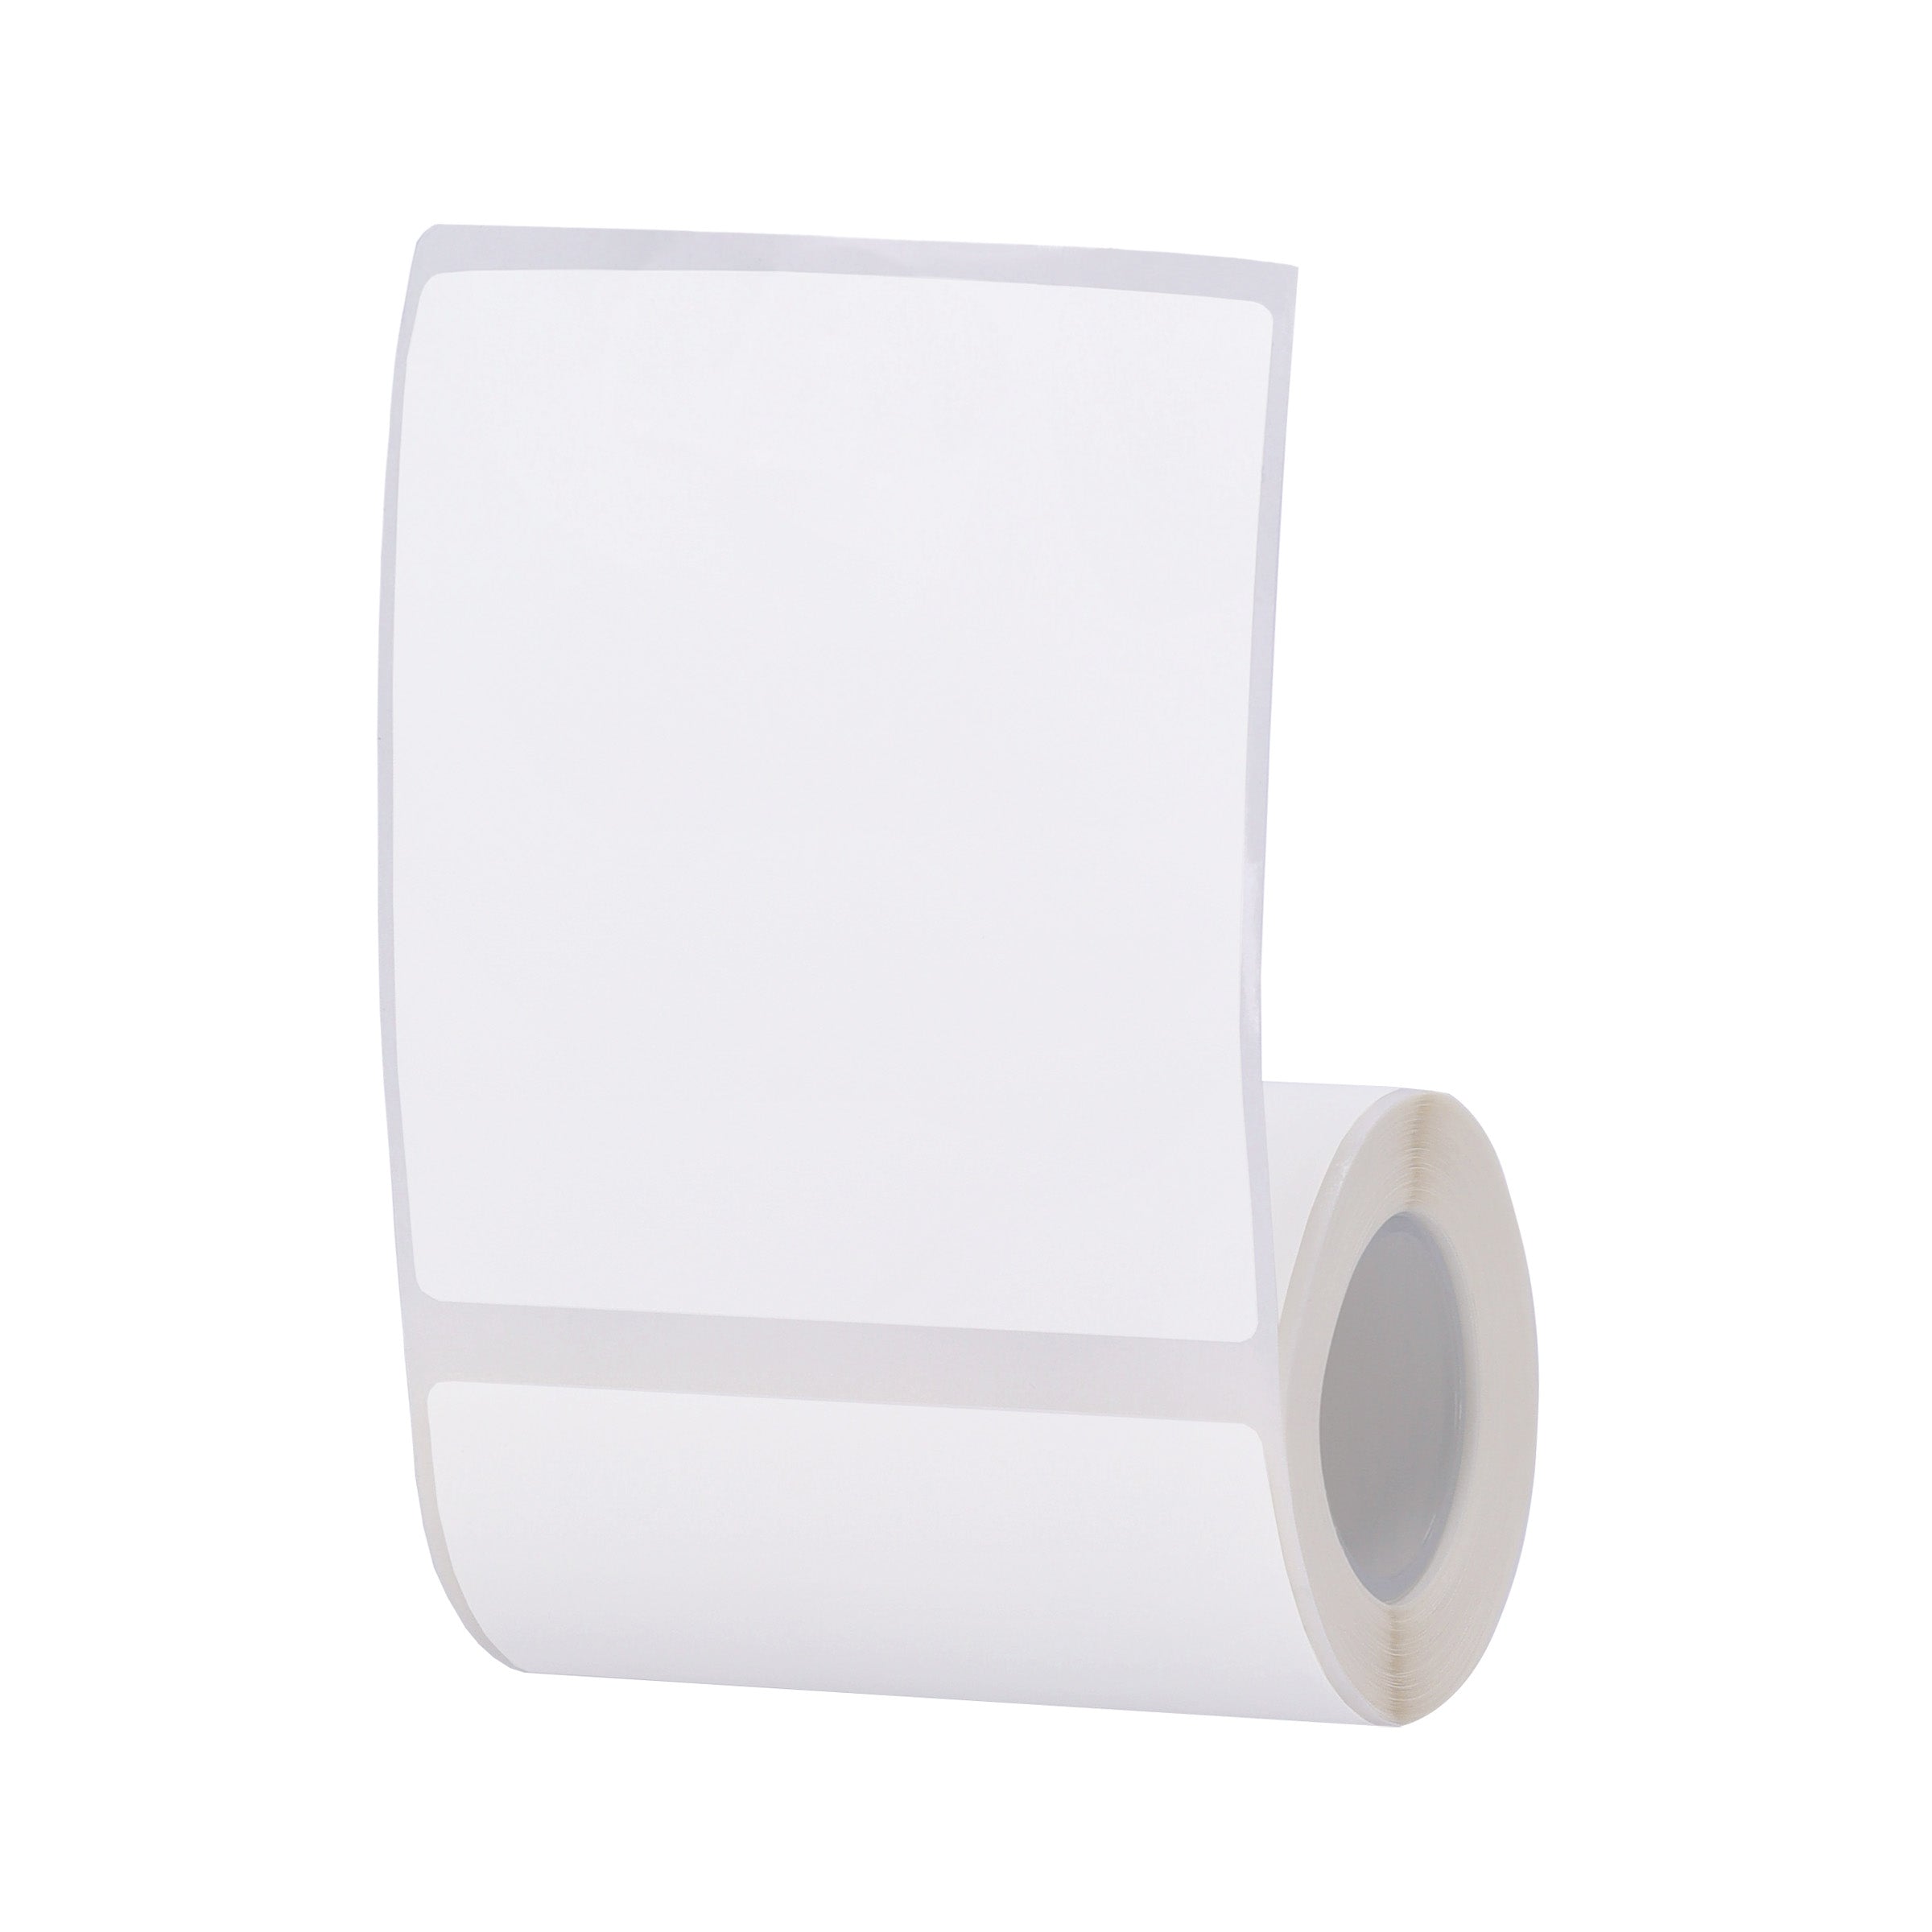 NB513 - NIIMBOT - B3S ONLY - T70*80MM - 95 LABELS PER ROLL - WHITE